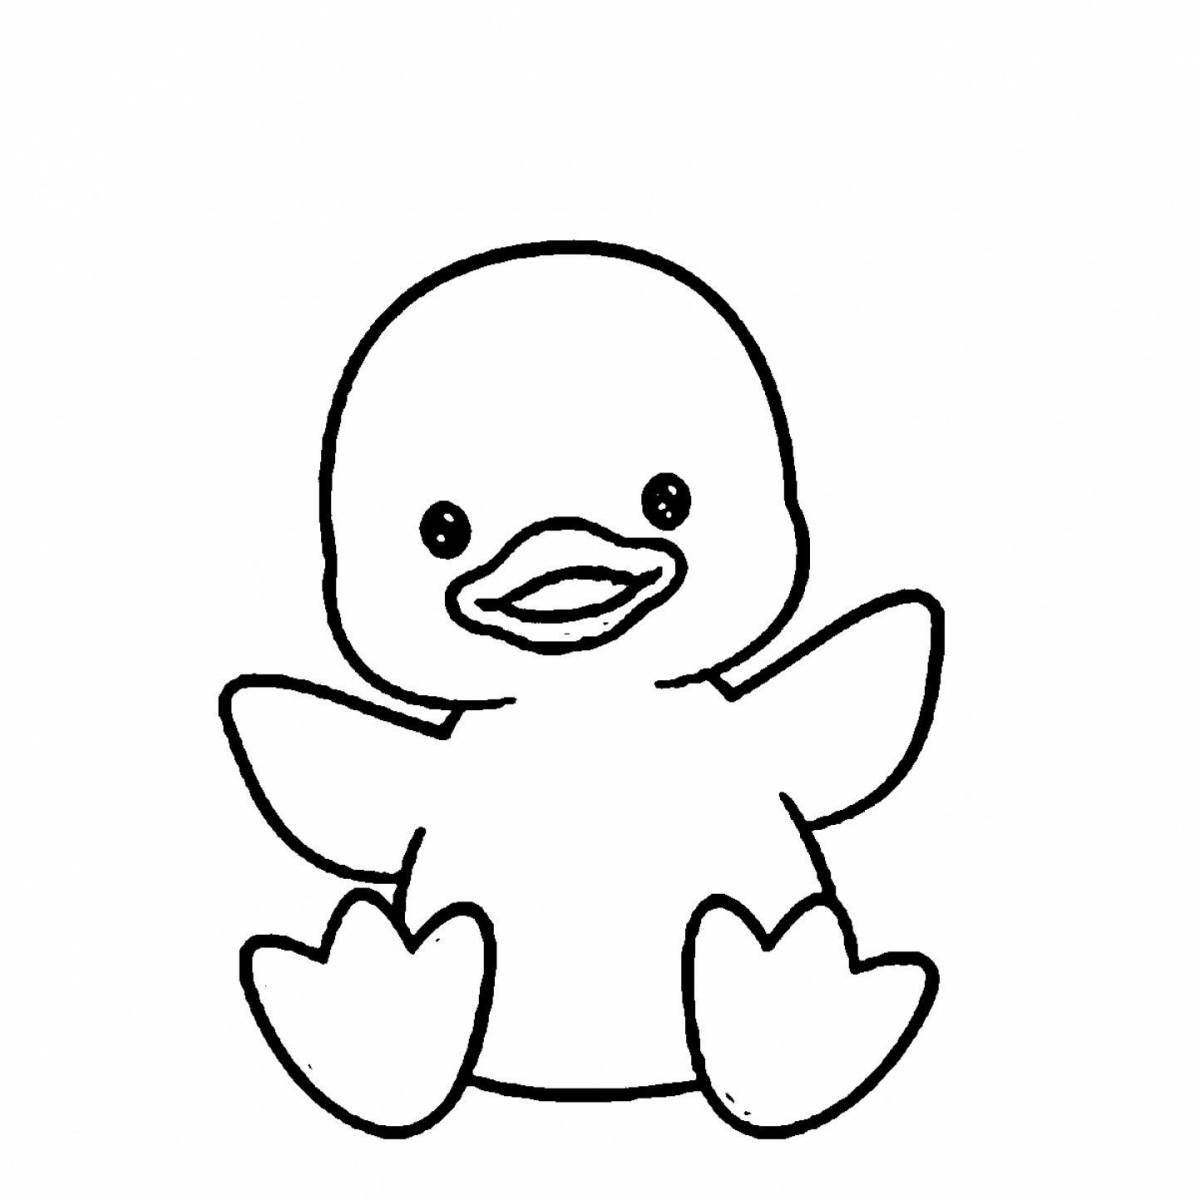 Colorful lalafanfan duck coloring page